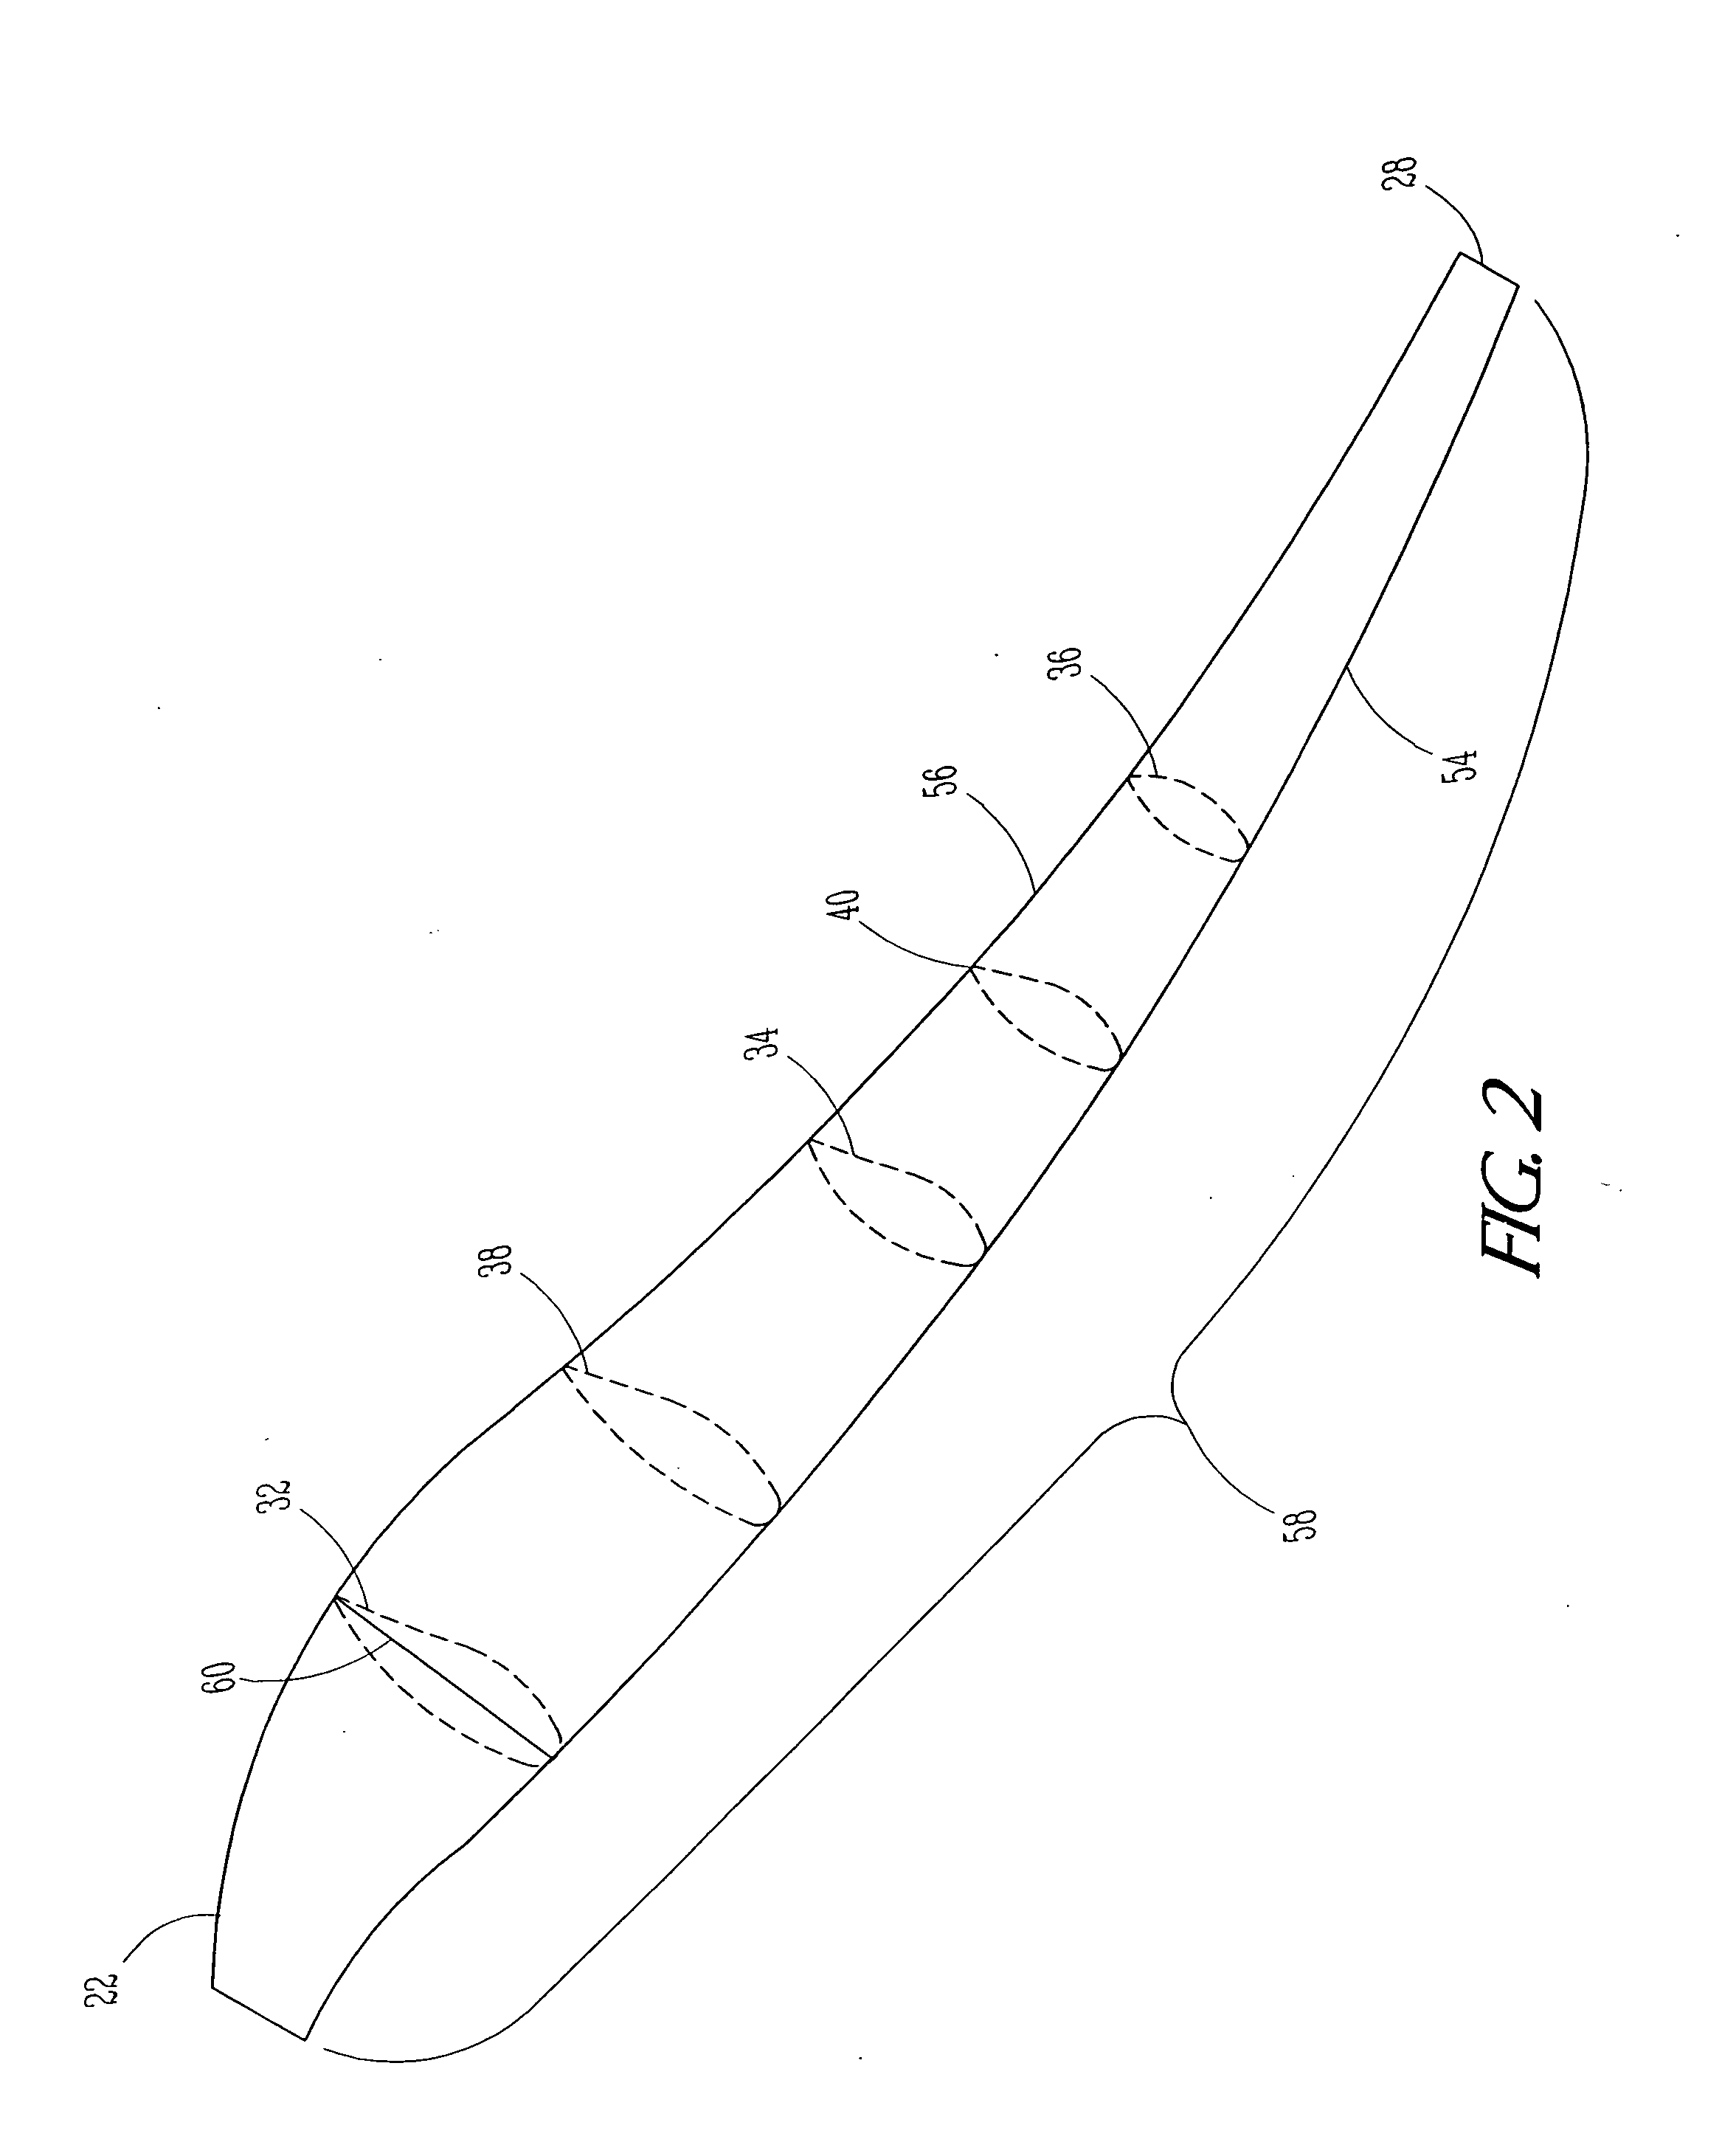 Wind turbine rotor blade and airfoil section